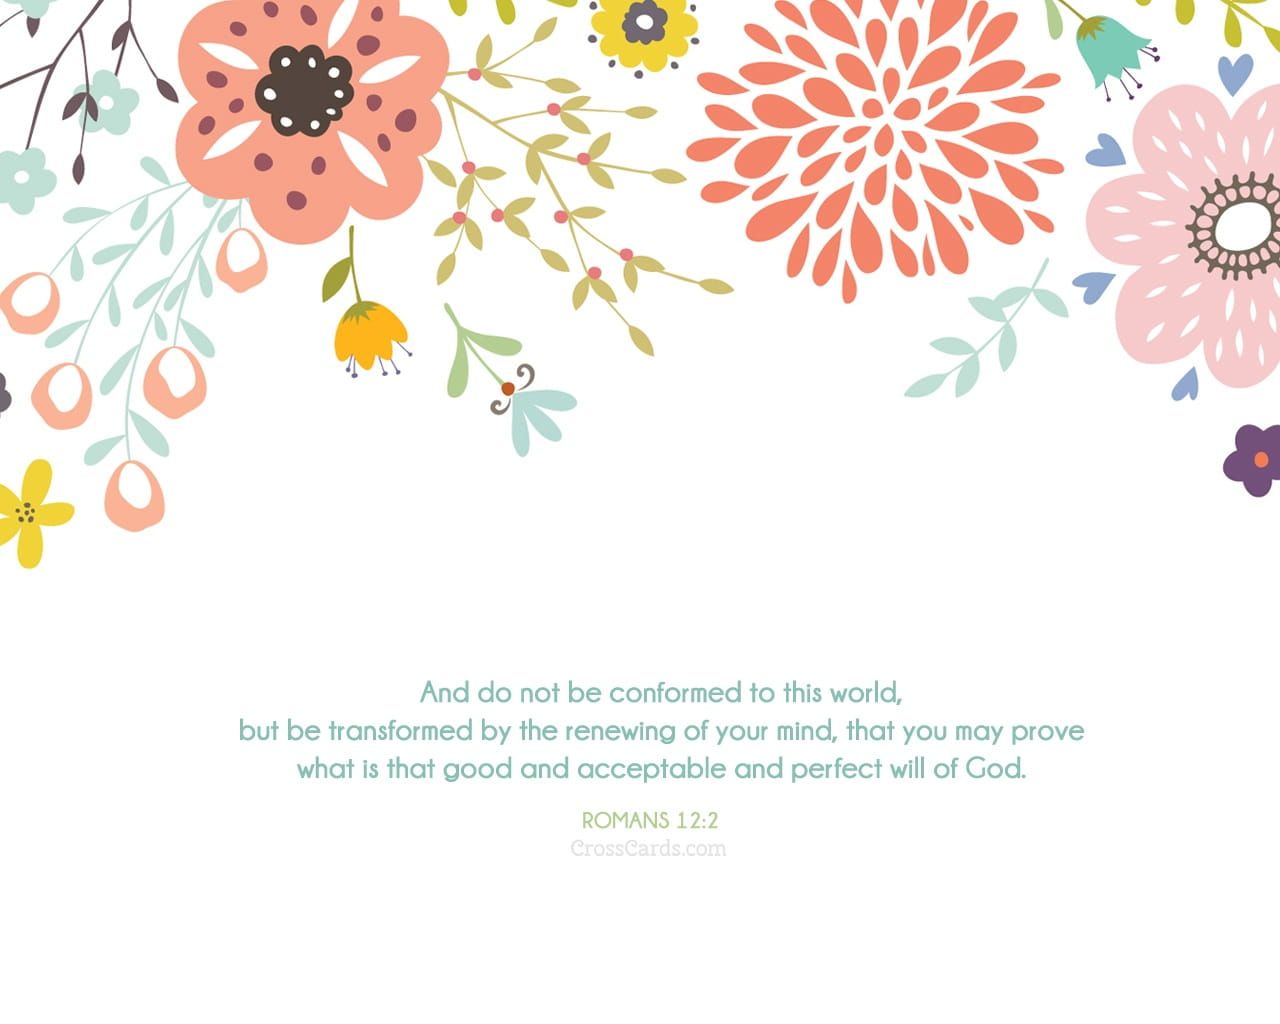 Romans 12:2 Verses and Scripture Wallpaper for Phone or